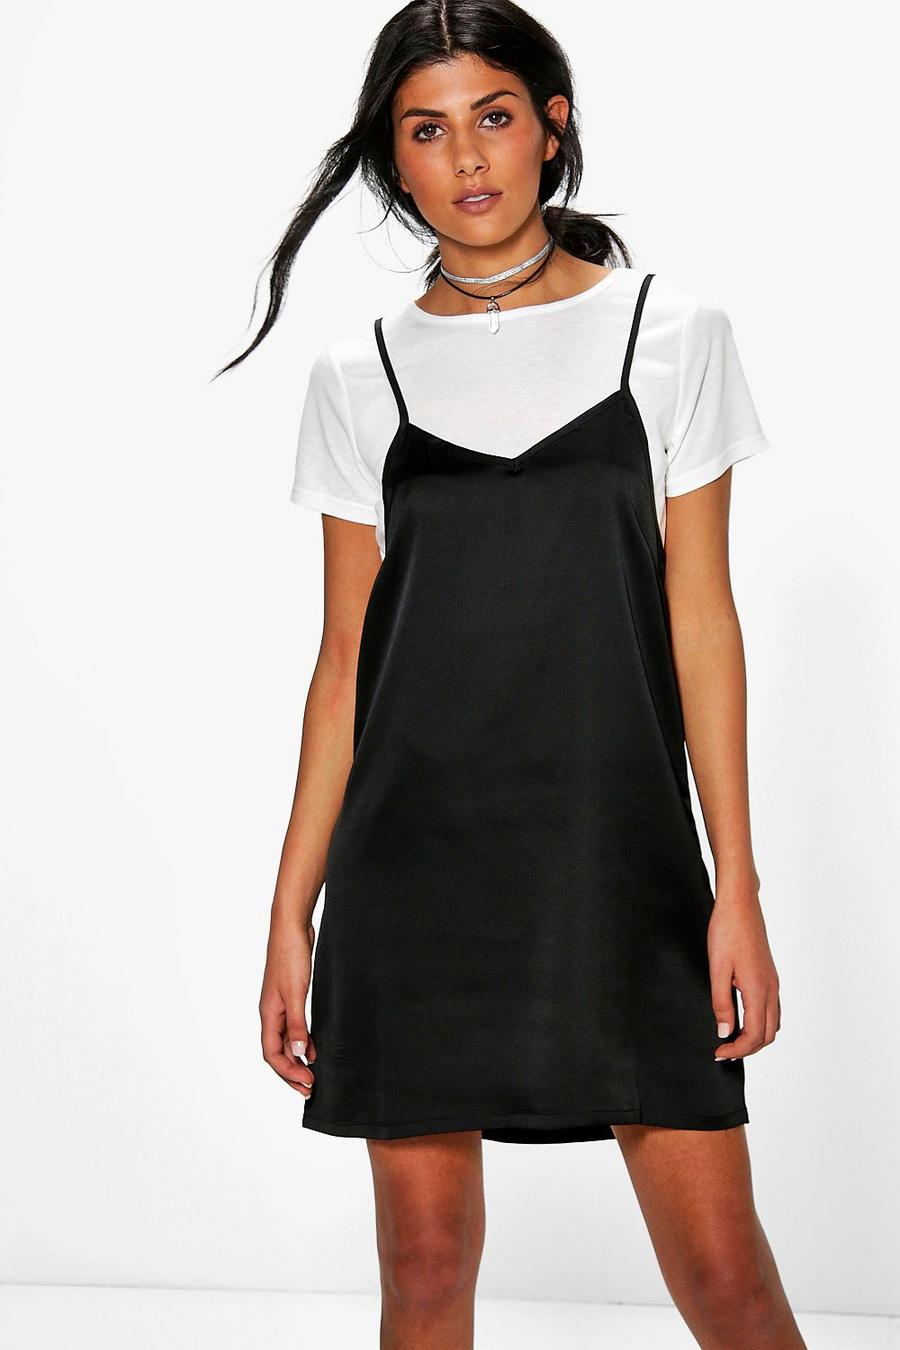 Lucy 1 T-Shirt With Satin Slip | boohoo